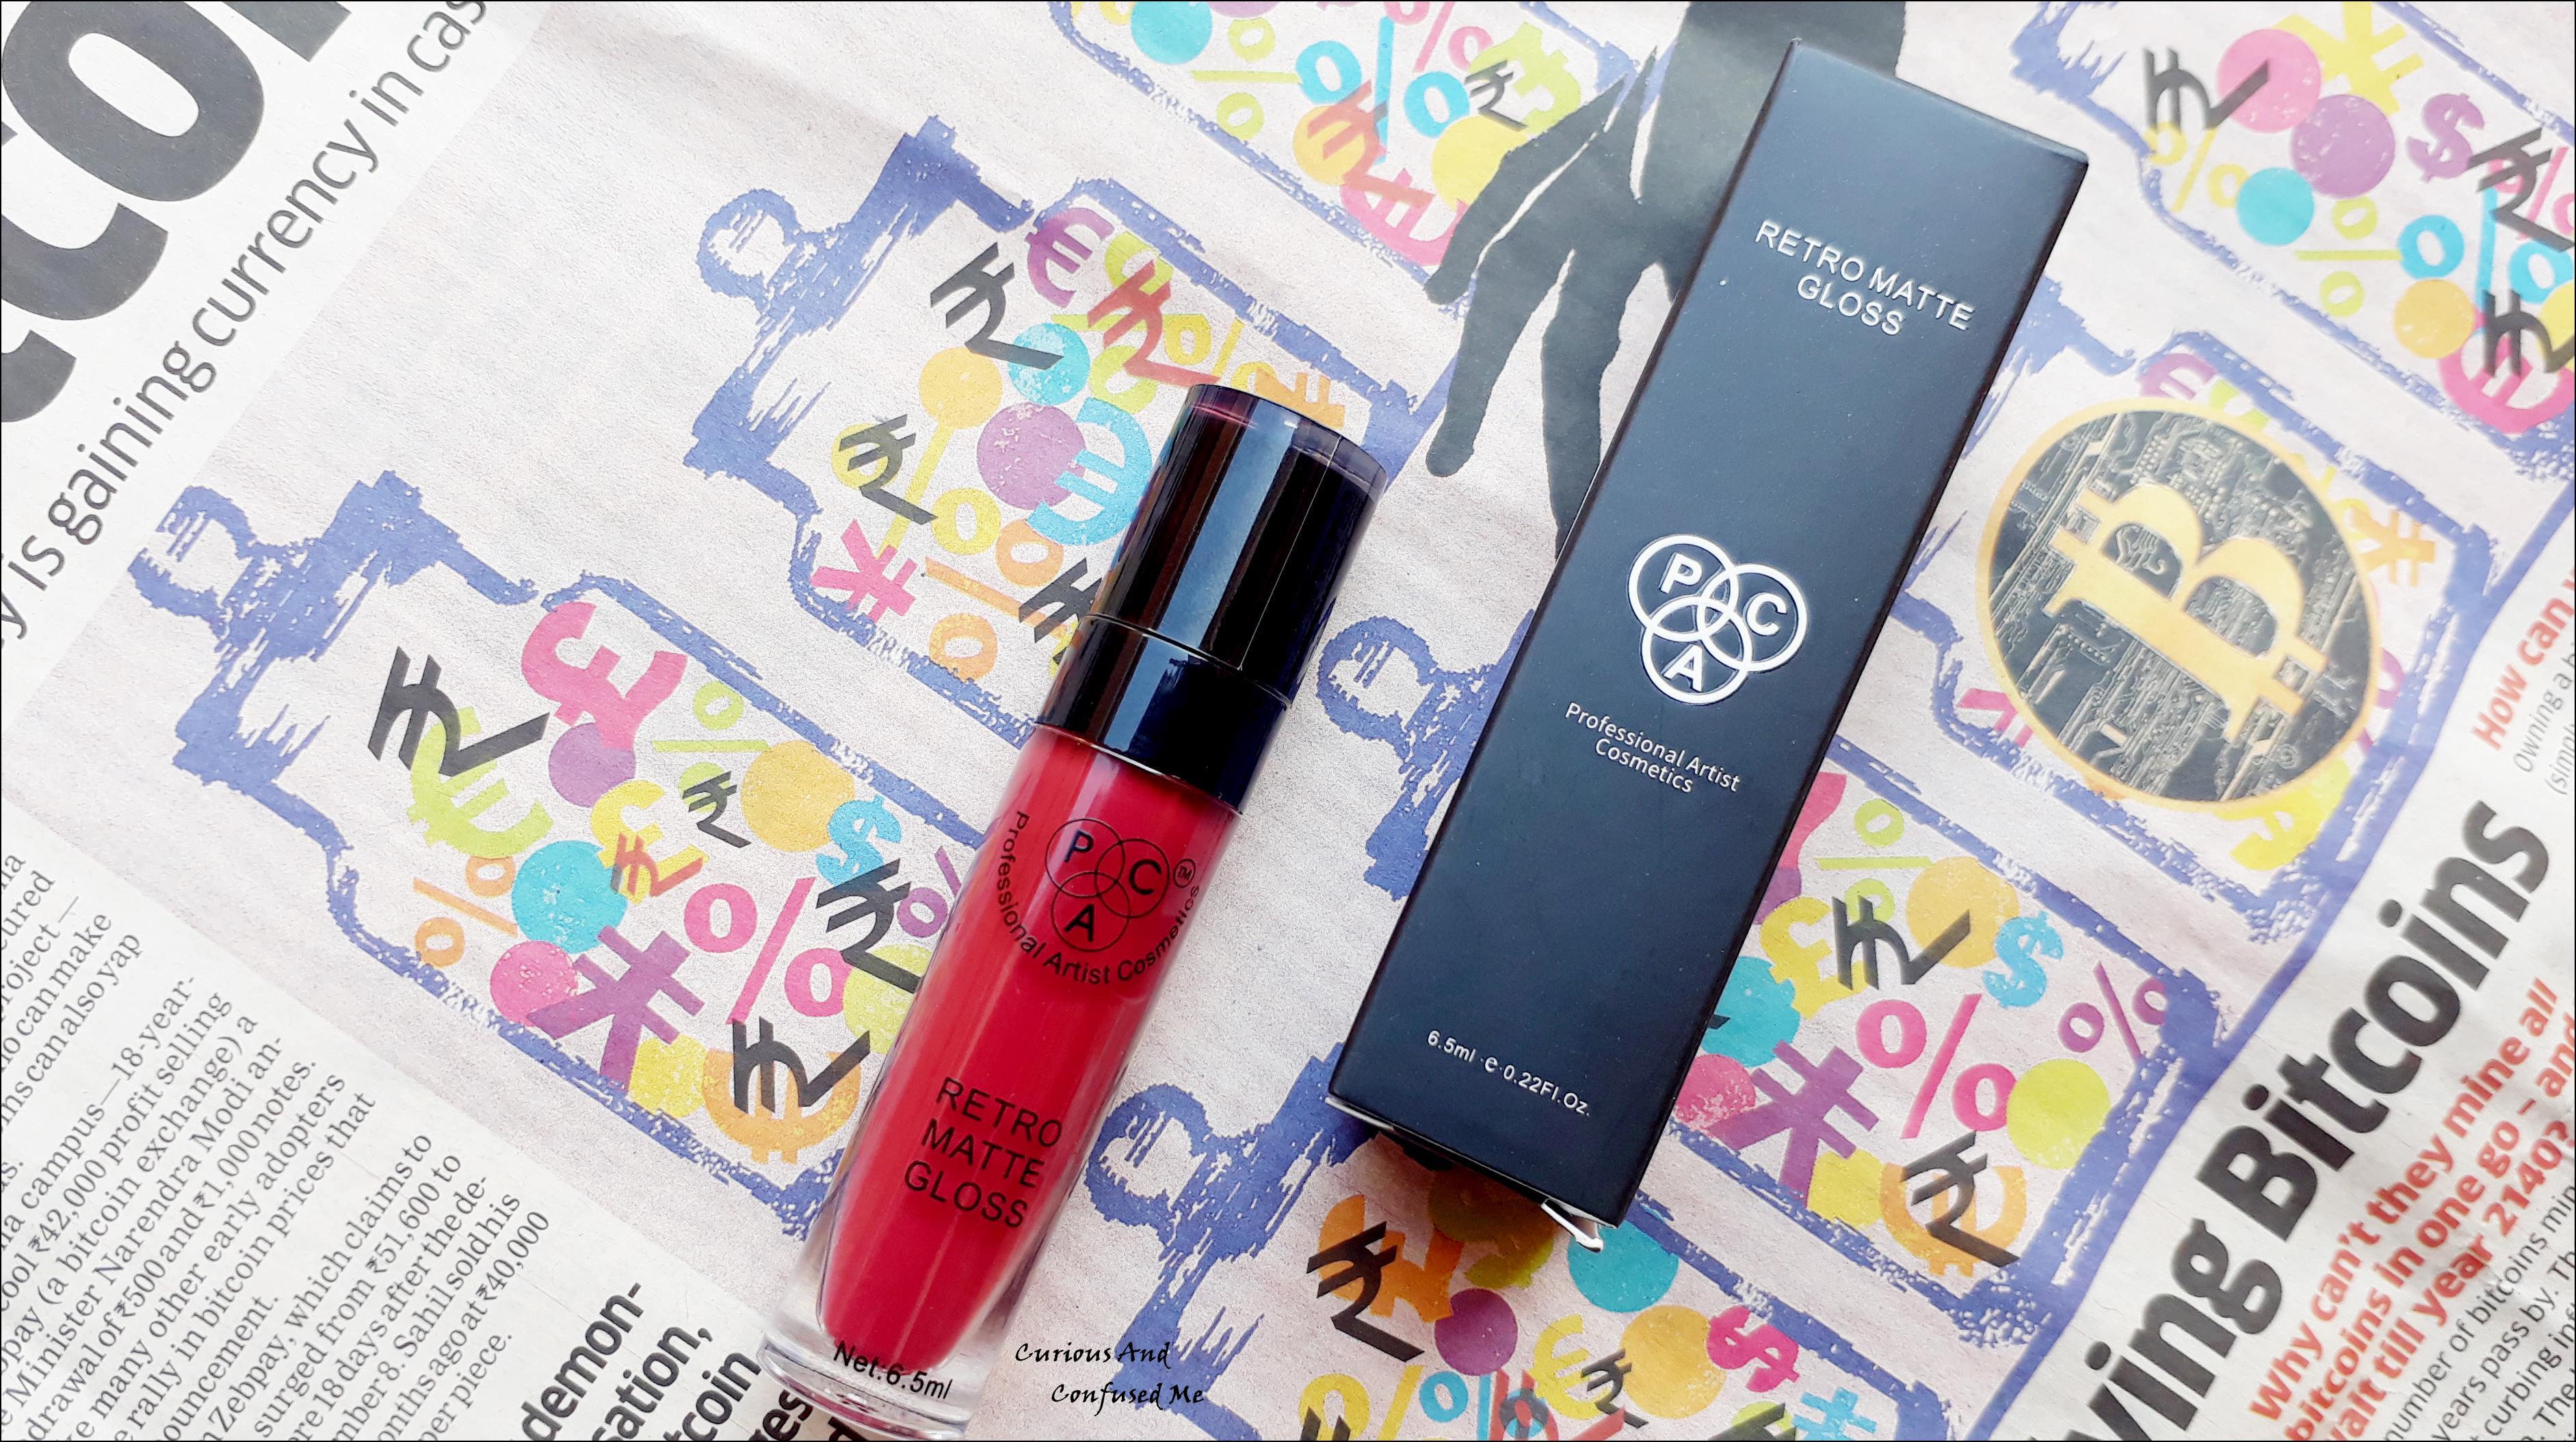 PAC Retro Matte Gloss 18 : Review, swatch, LOTD